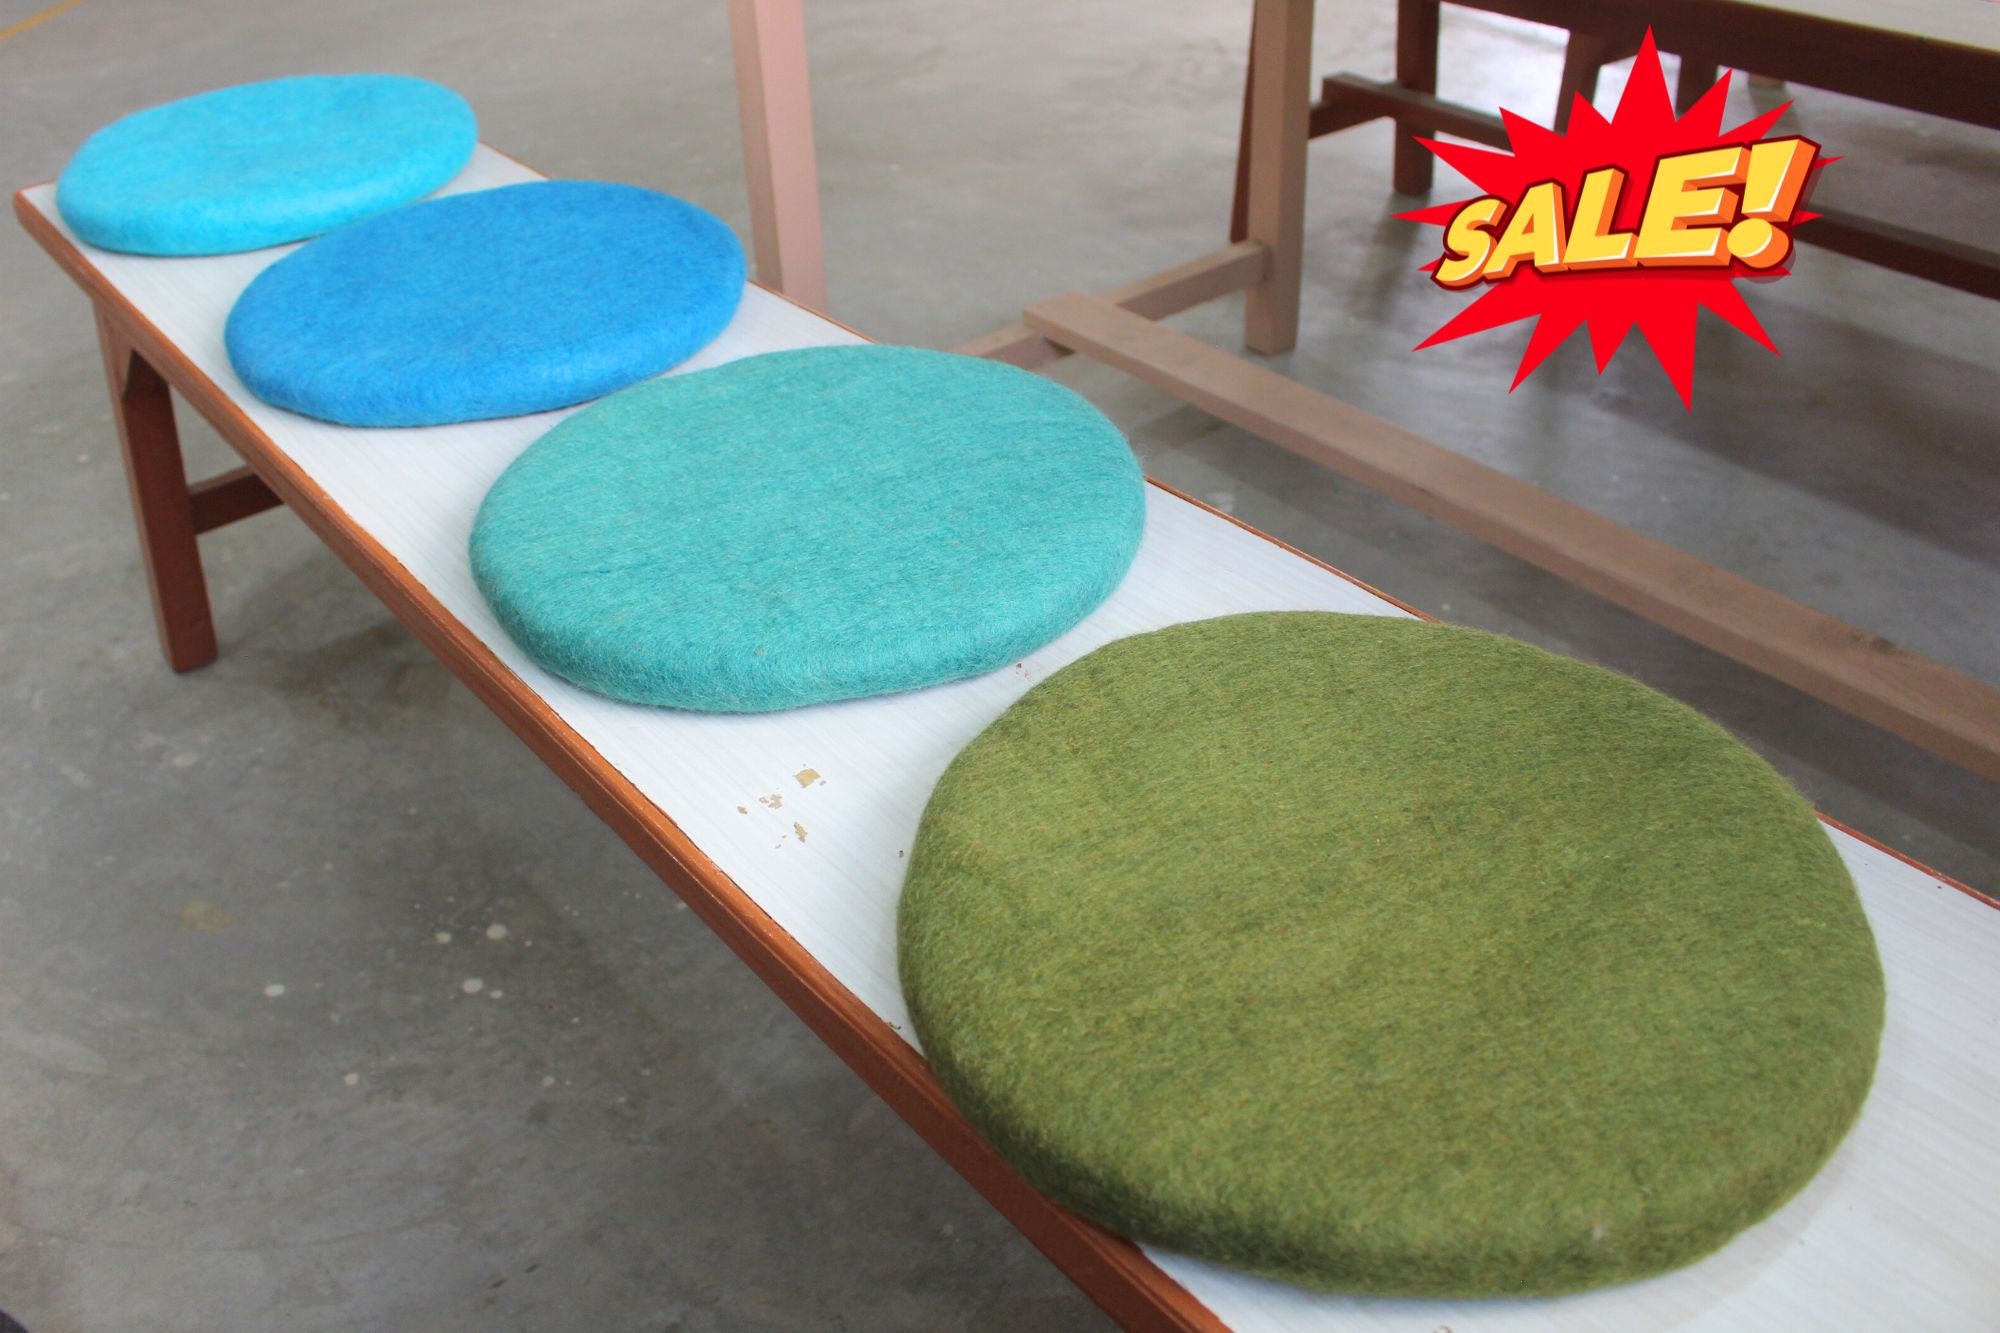 35cm Wool Felted Seat Pad, Round Thick Chair Cushion for Felt Home Decor,  Start With 2 Sets of Handmade Pads 